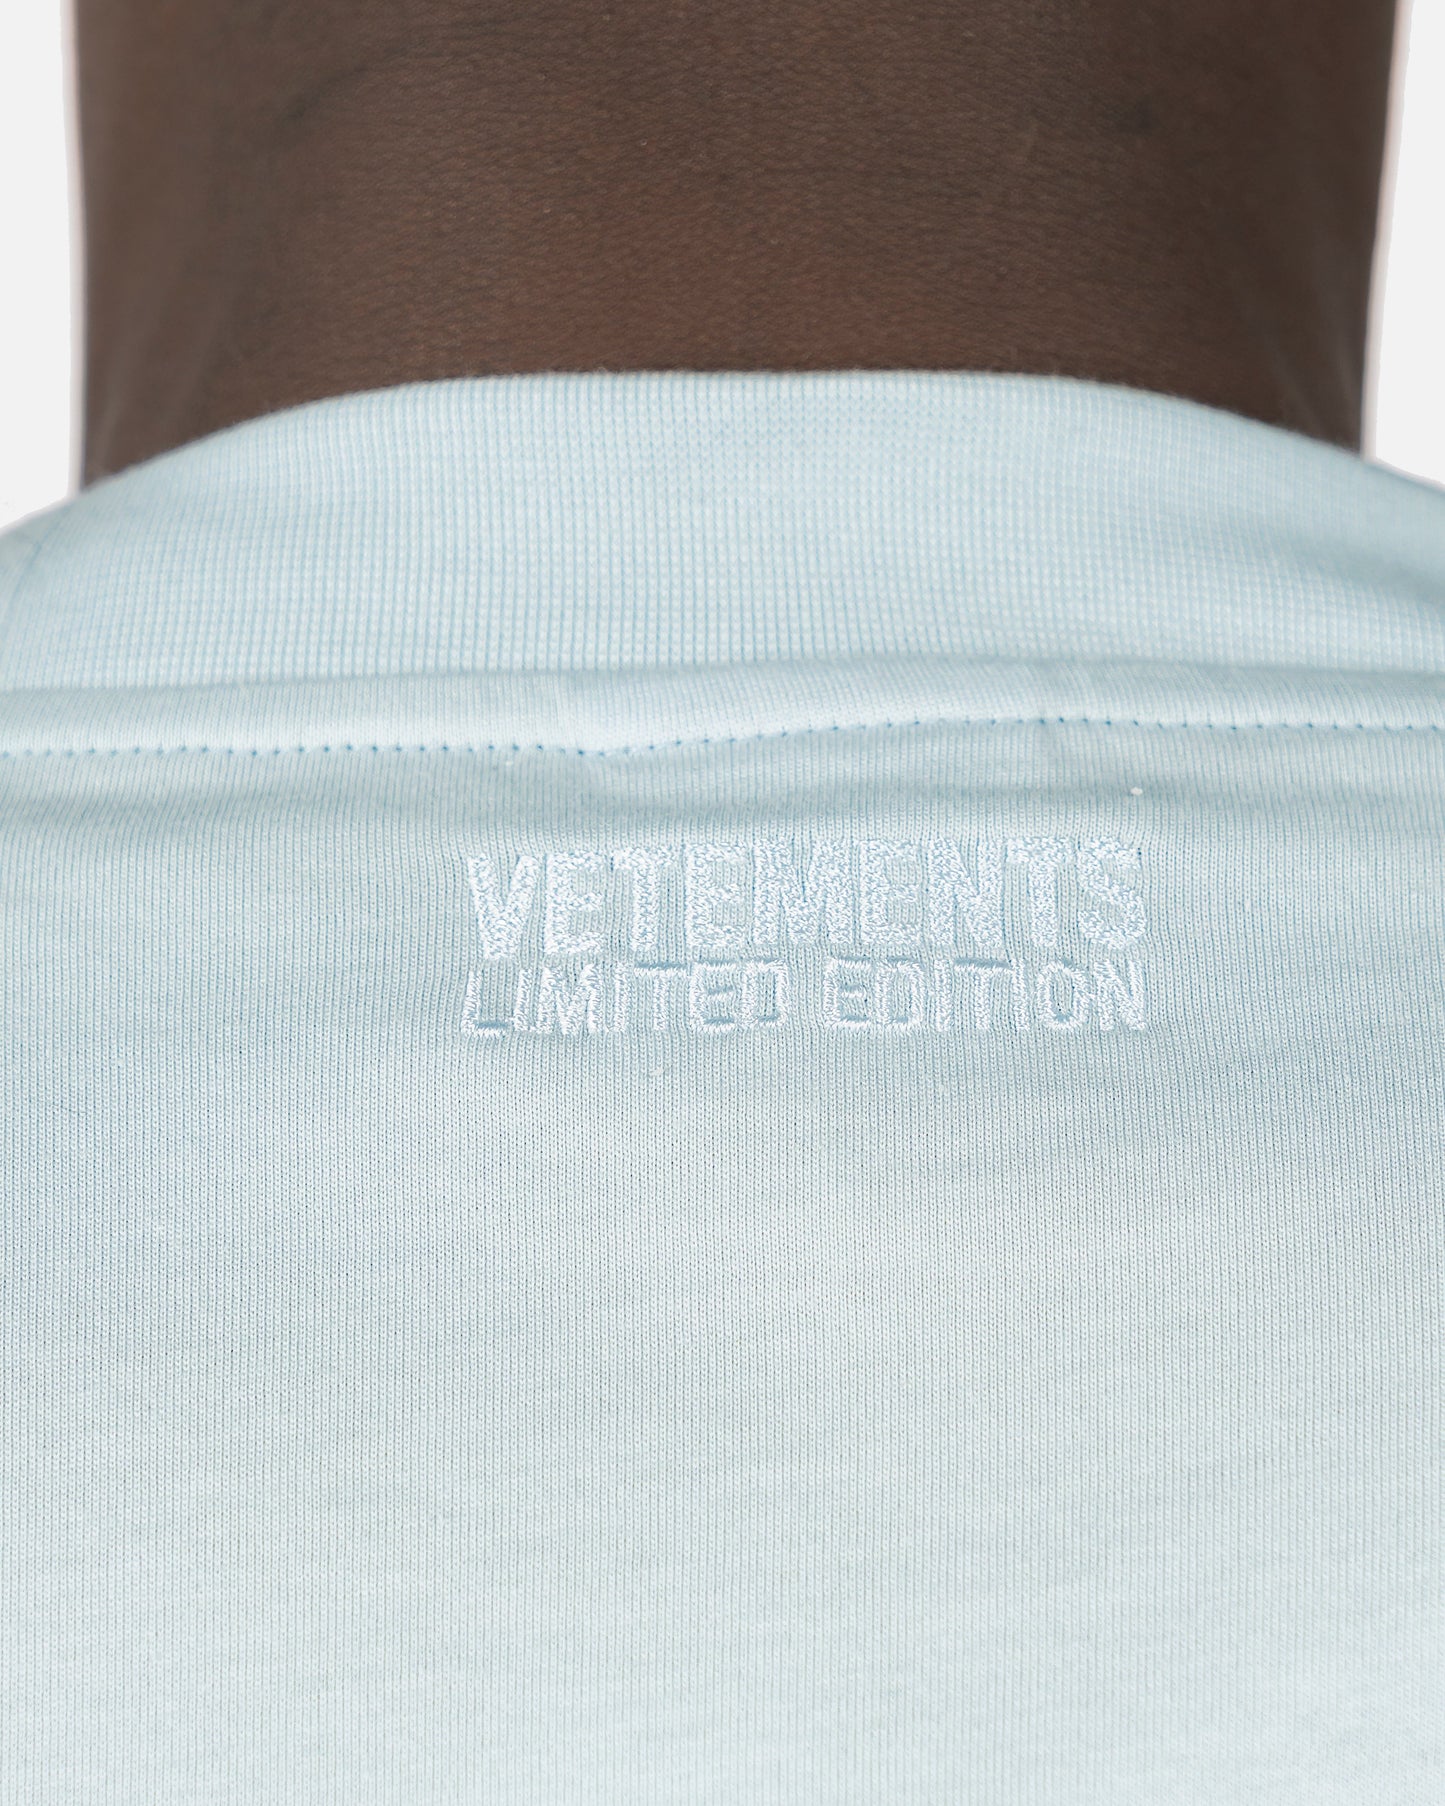 VETEMENTS Men's T-Shirts Still No Date T-Shirt in Baby Blue